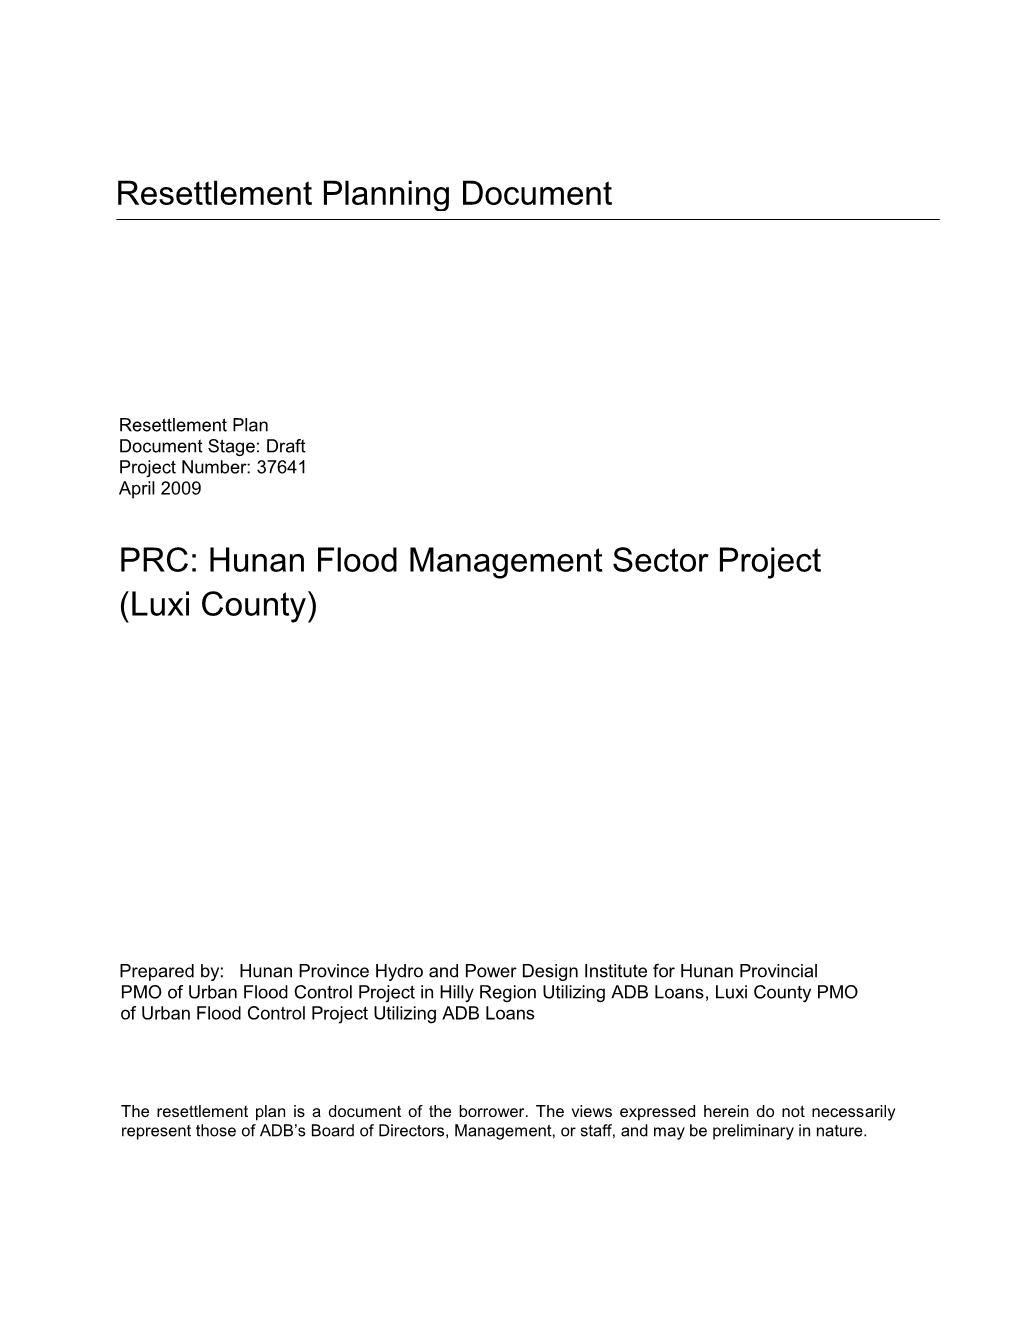 Hunan Flood Management Sector Project (Luxi County)